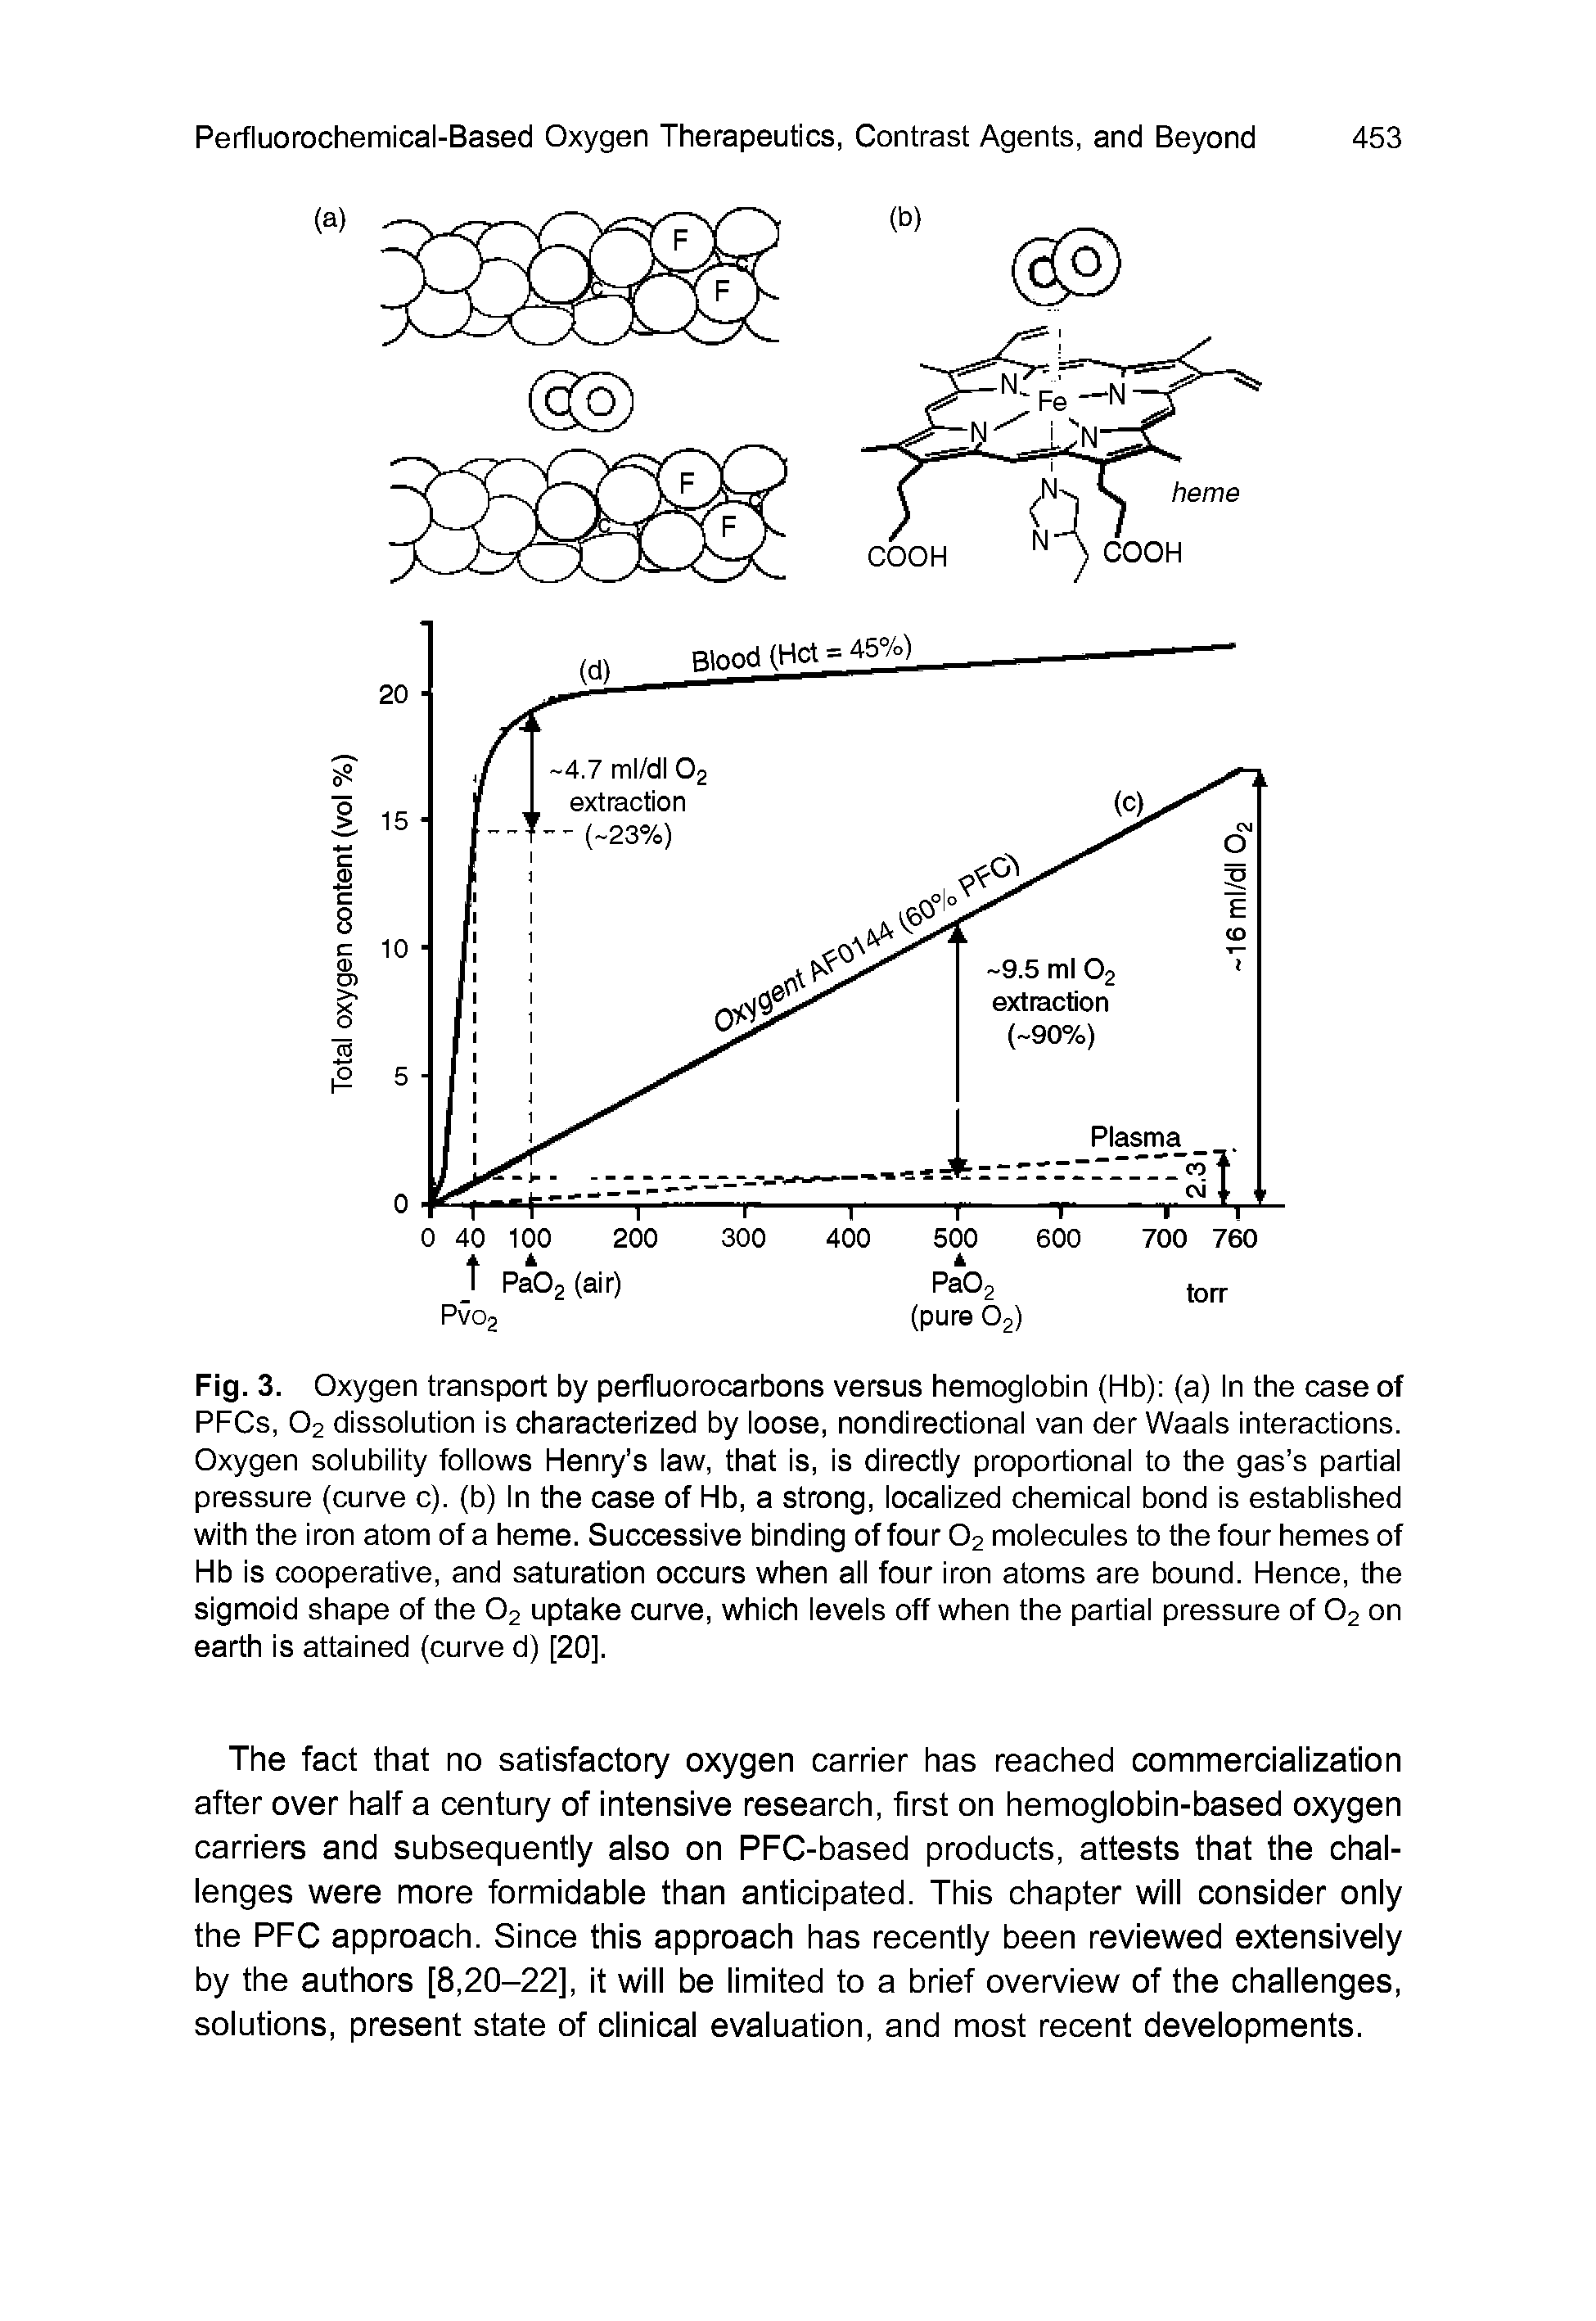 Fig. 3. Oxygen transport by perfluorocarbons versus hemoglobin (Hb) (a) In the case of PFCs, O2 dissolution is characterized by loose, nondirectional van der Waals interactions. Oxygen solubility follows Henry s law, that is, is directly proportional to the gas s partial pressure (curve c). (b) In the case of Hb, a strong, localized chemical bond is established with the iron atom of a heme. Successive binding of four O2 molecules to the four hemes of Hb is cooperative, and saturation occurs when all four iron atoms are bound. Hence, the sigmoid shape of the O2 uptake curve, which levels off when the partial pressure of O2 on earth is attained (curve d) [20].